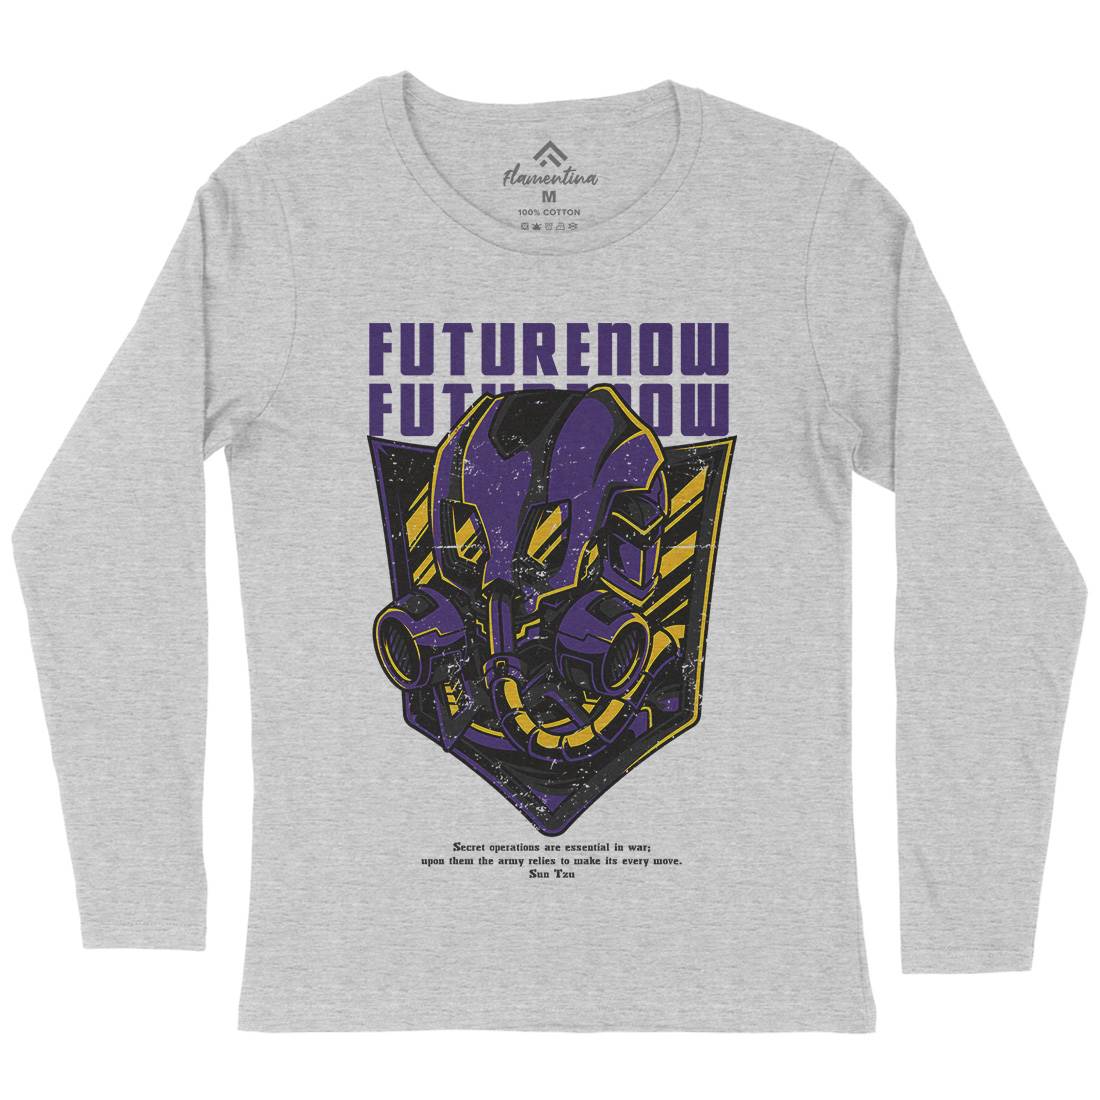 Future Now Womens Long Sleeve T-Shirt Army D788